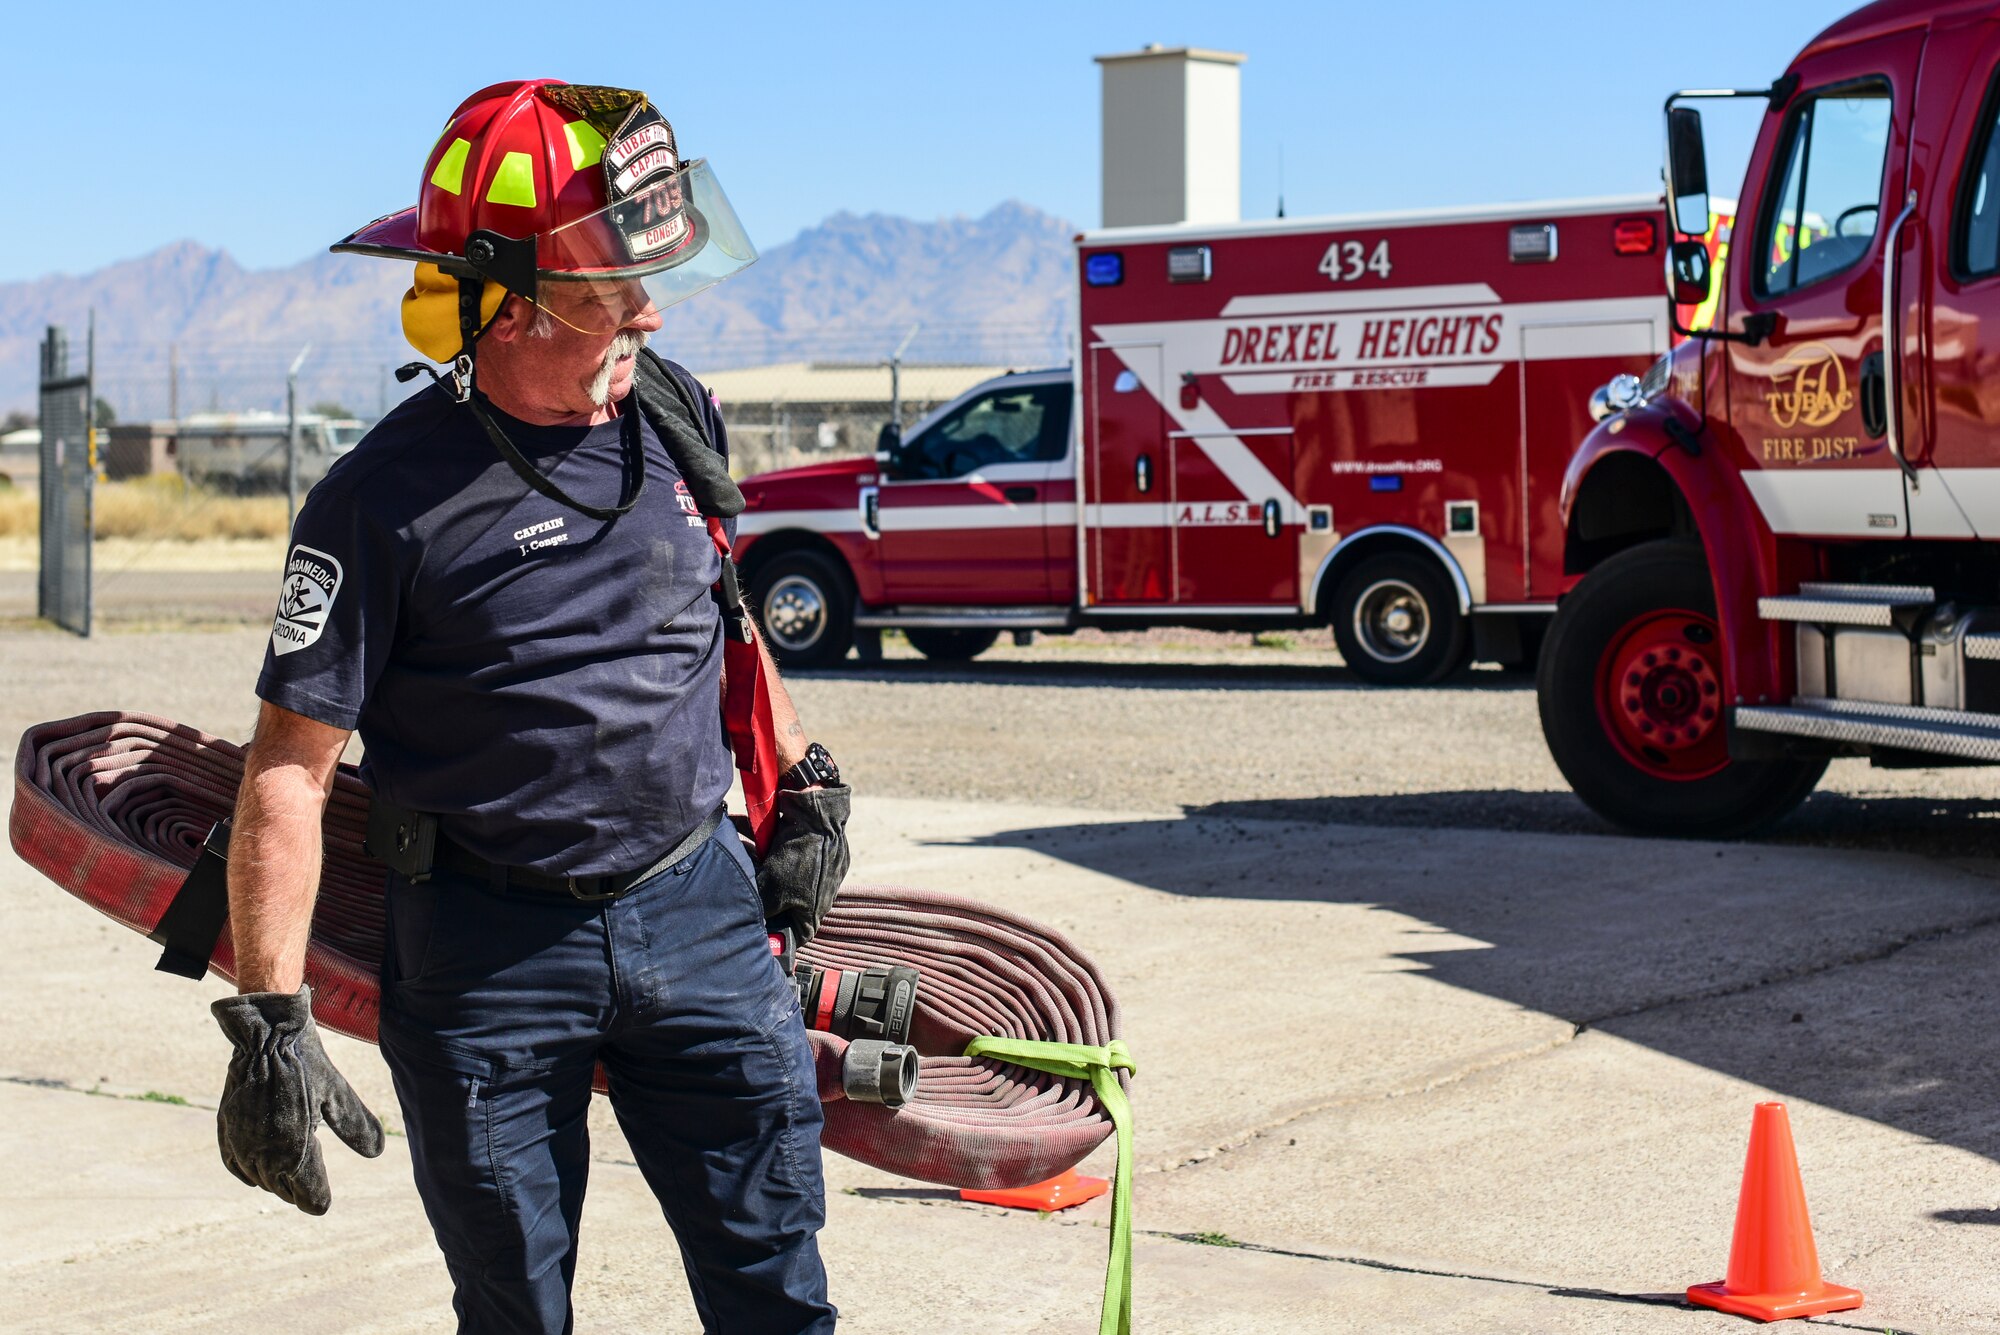 A photo of a firefighter carrying a hose.